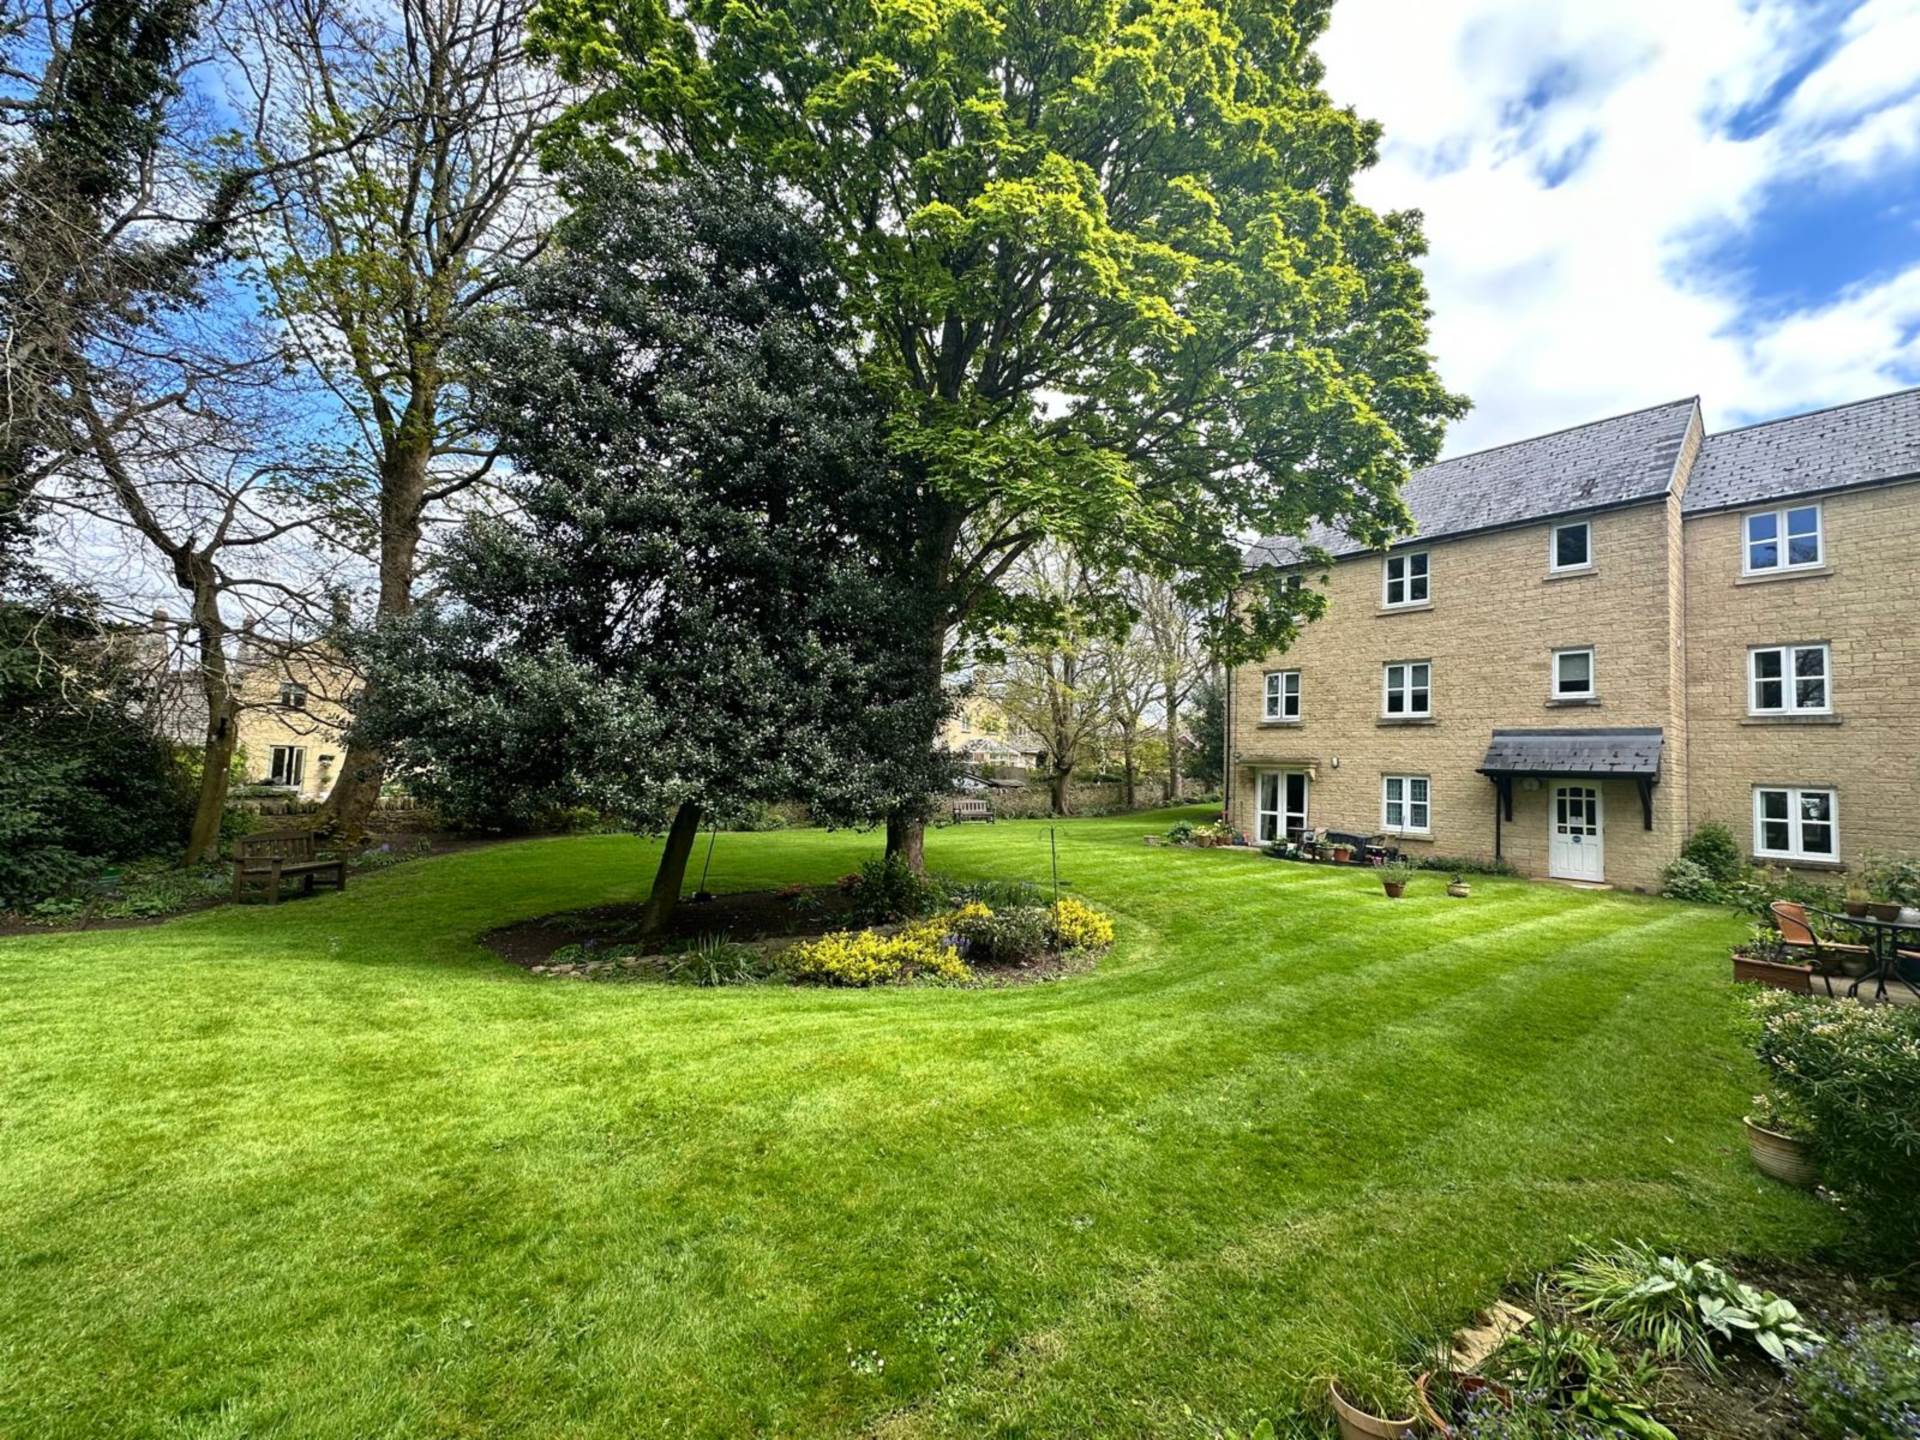 1 bed Retirement for rent in Chipping Norton. From Distinct Property Consultants - Banbury